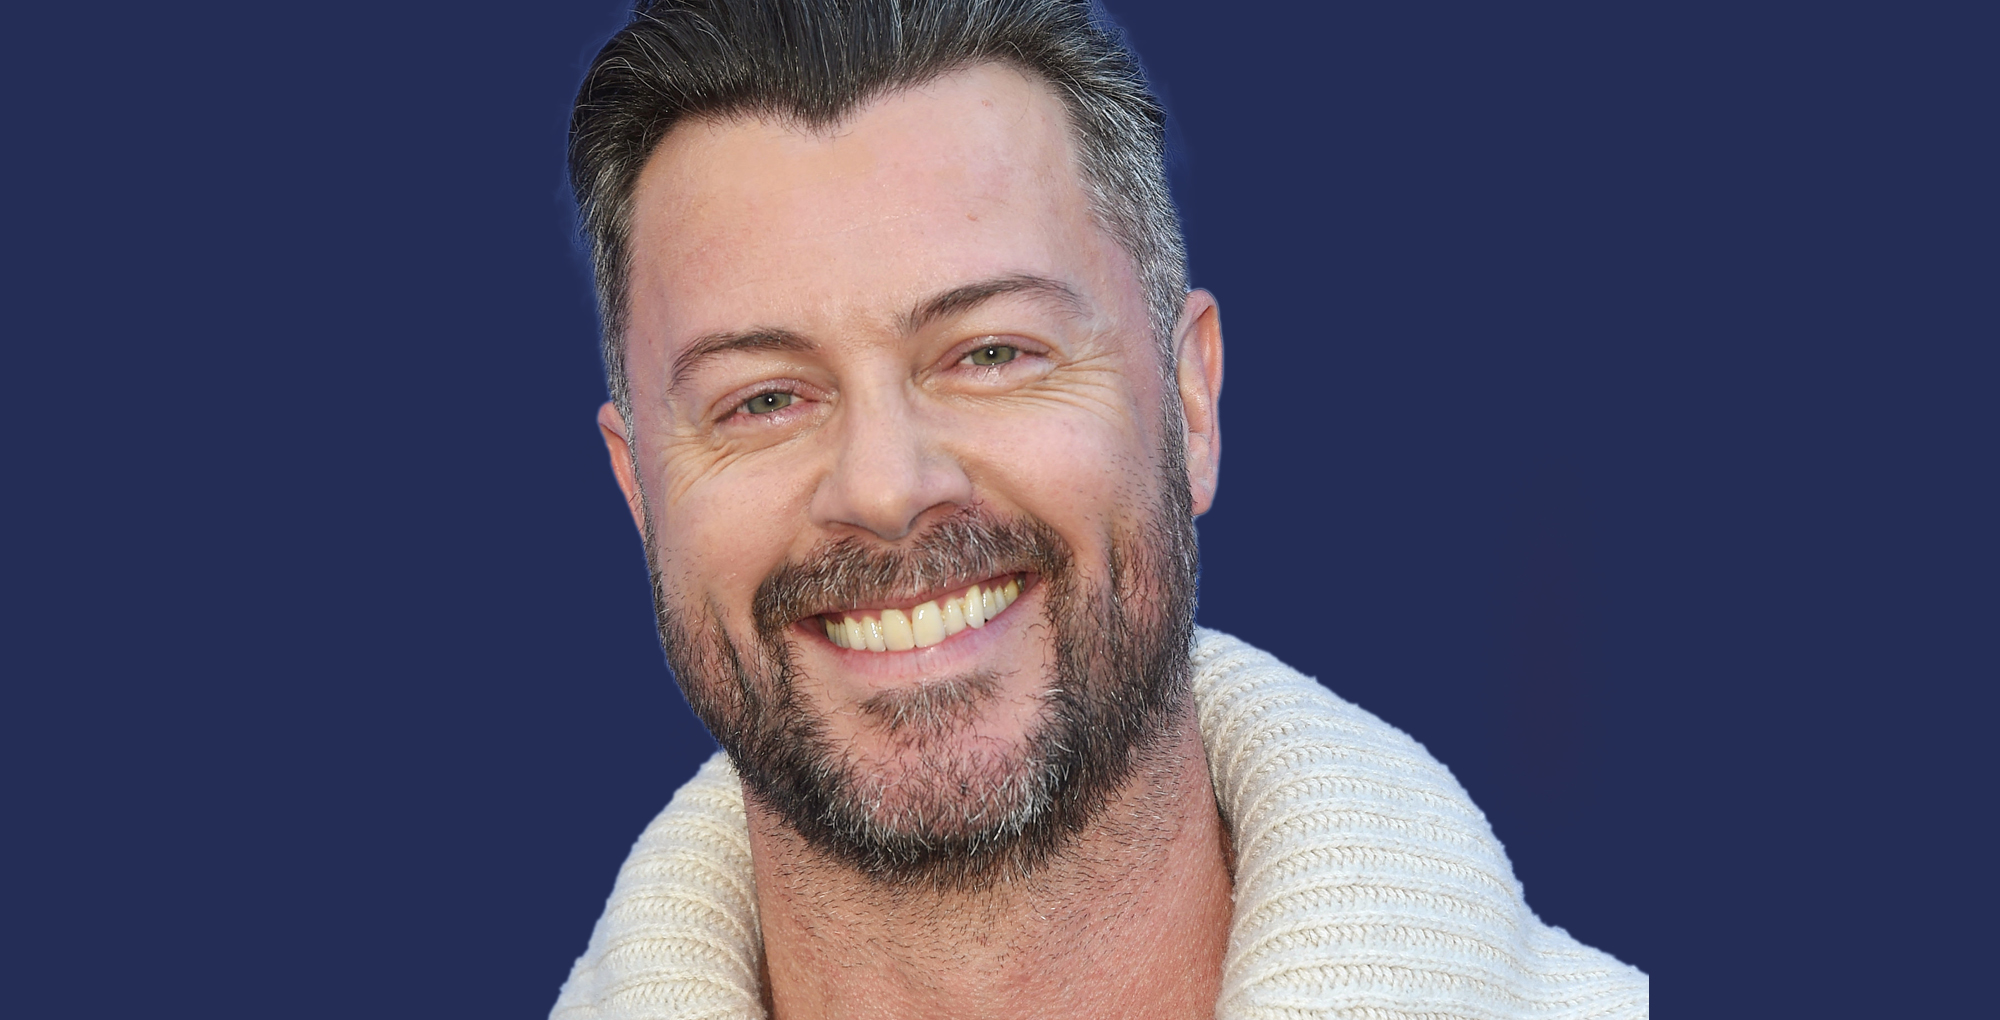 dan feuerriegel plays ej dimera on days of our lives.